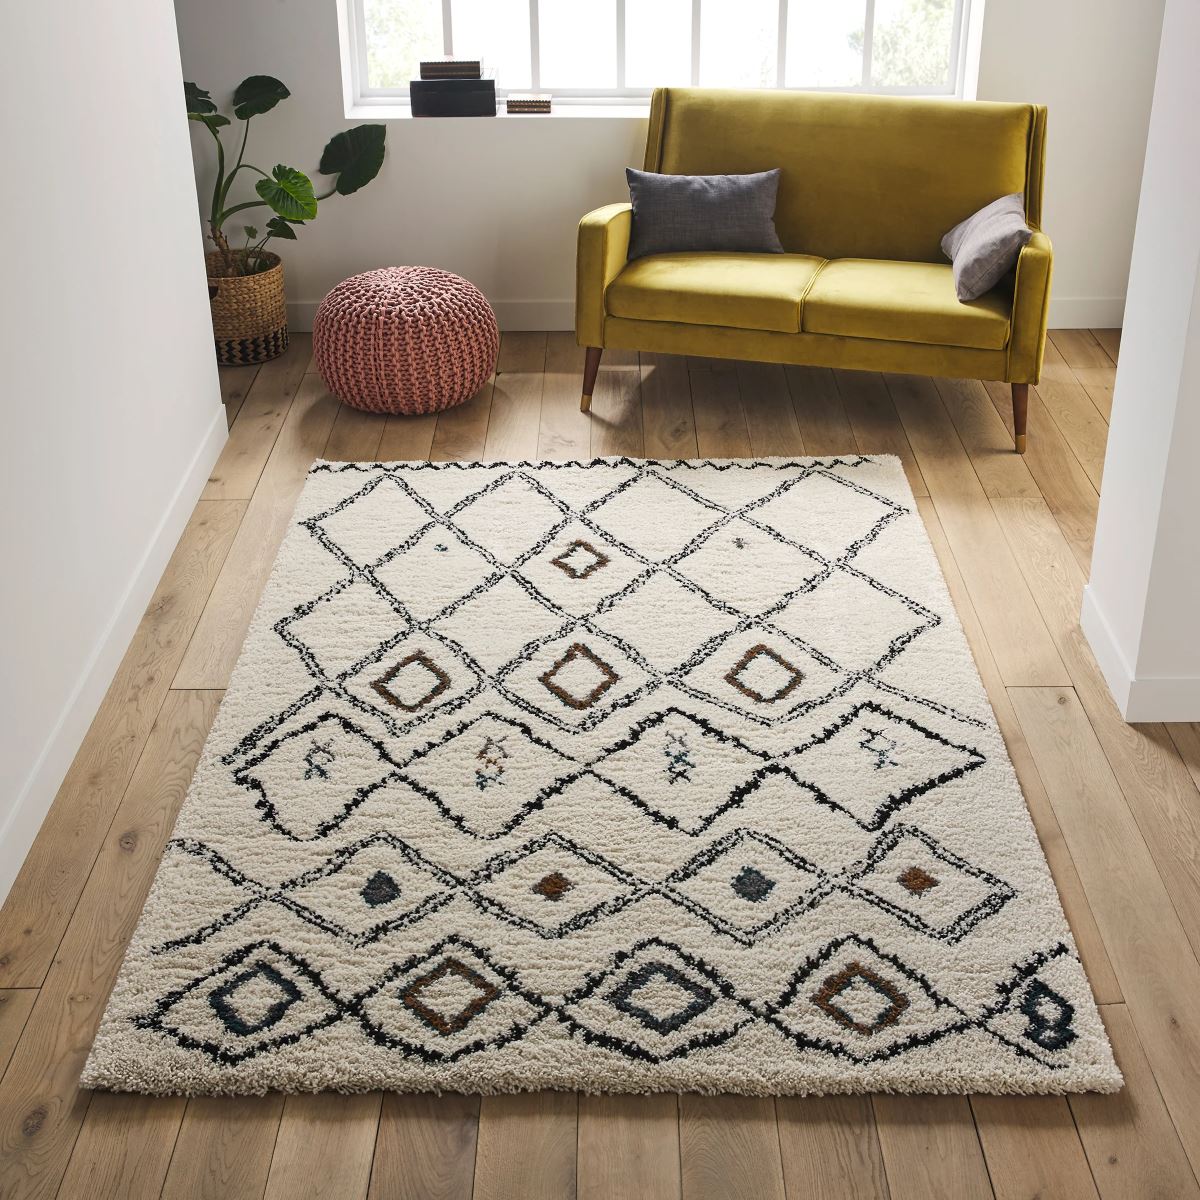 what-is-a-berber-rug